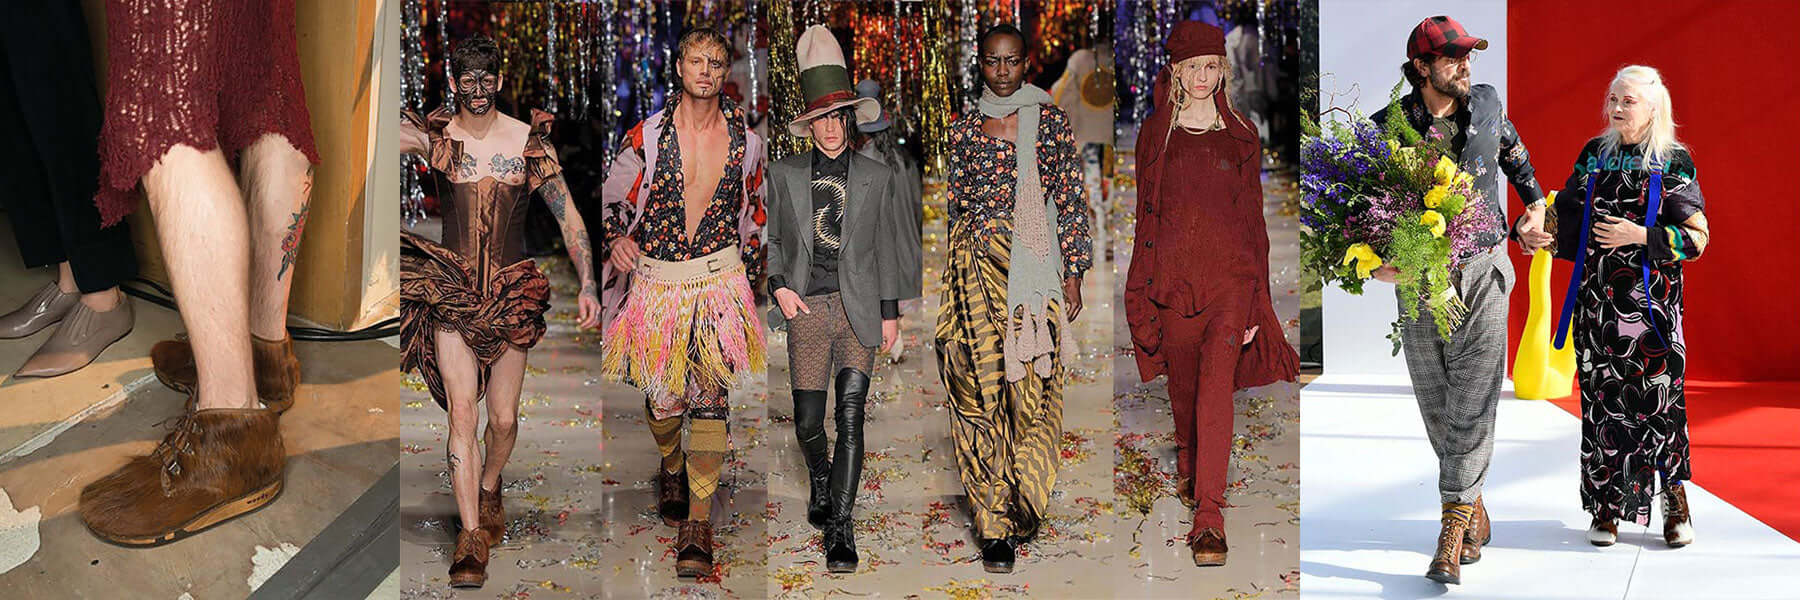 Family business goes fashion week - Vivien Westwood